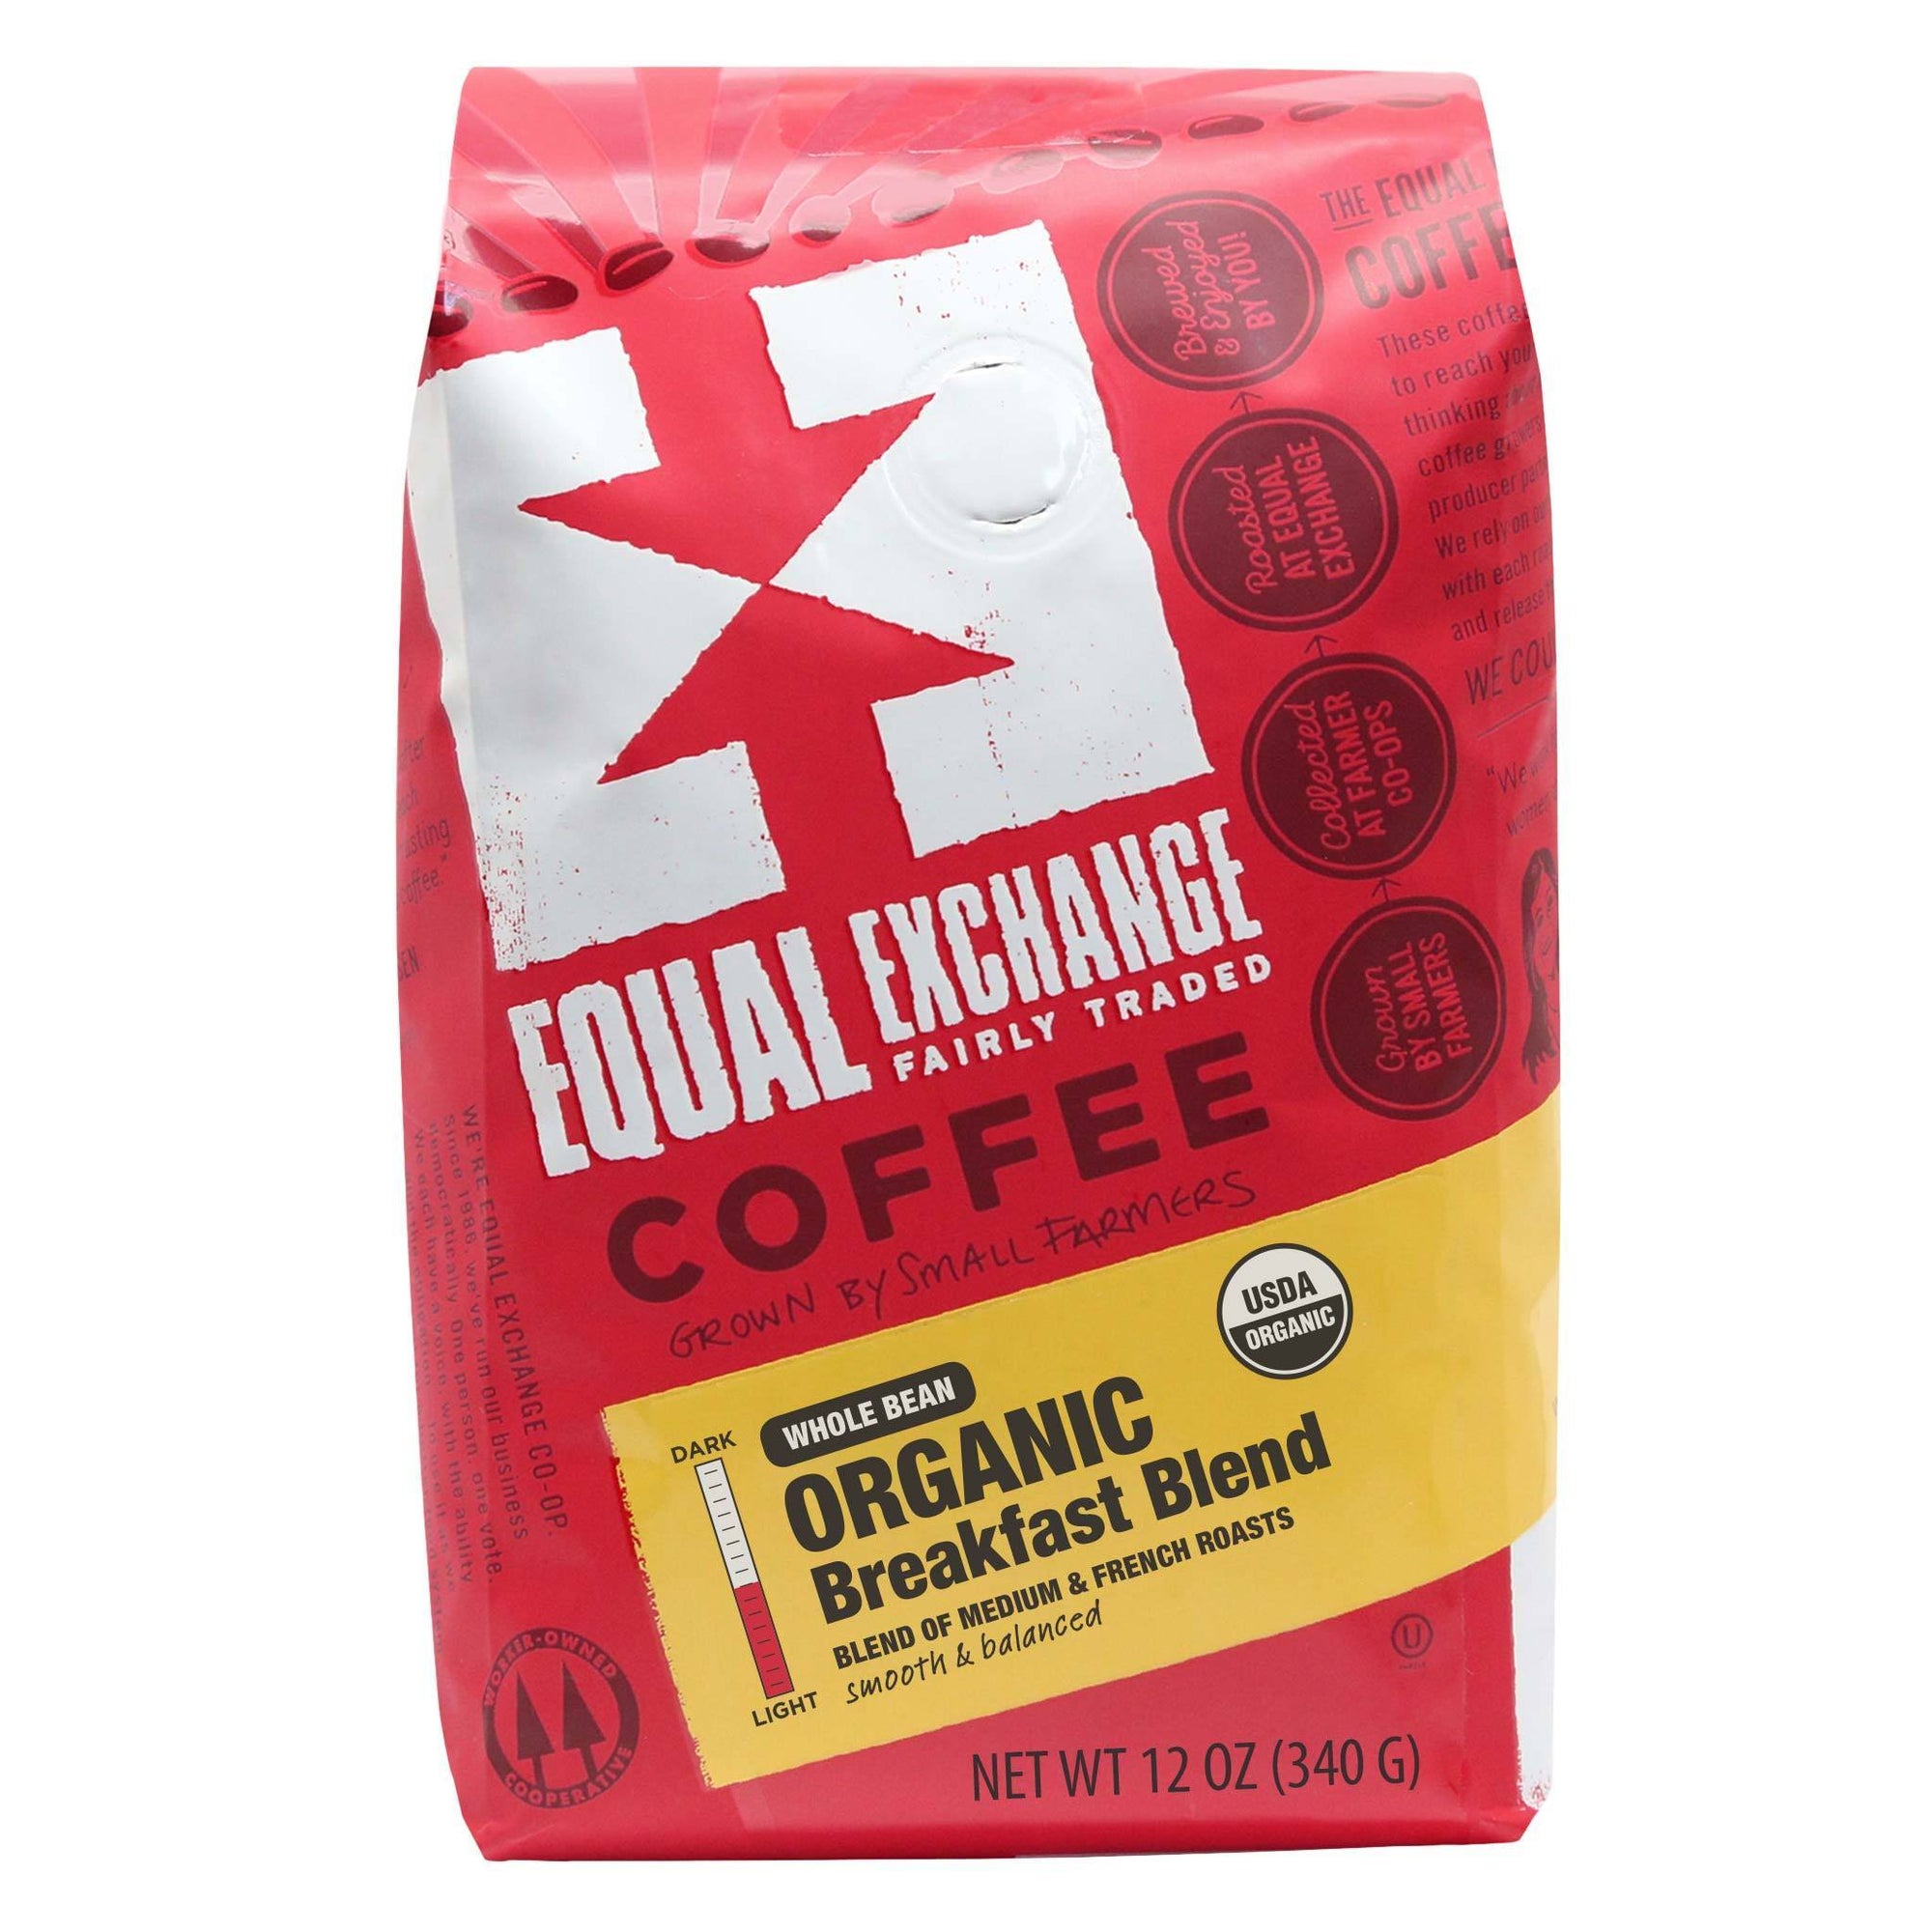 Breakfast Blend Organic Coffee 12oz- Equal Exchange - Whole Beans